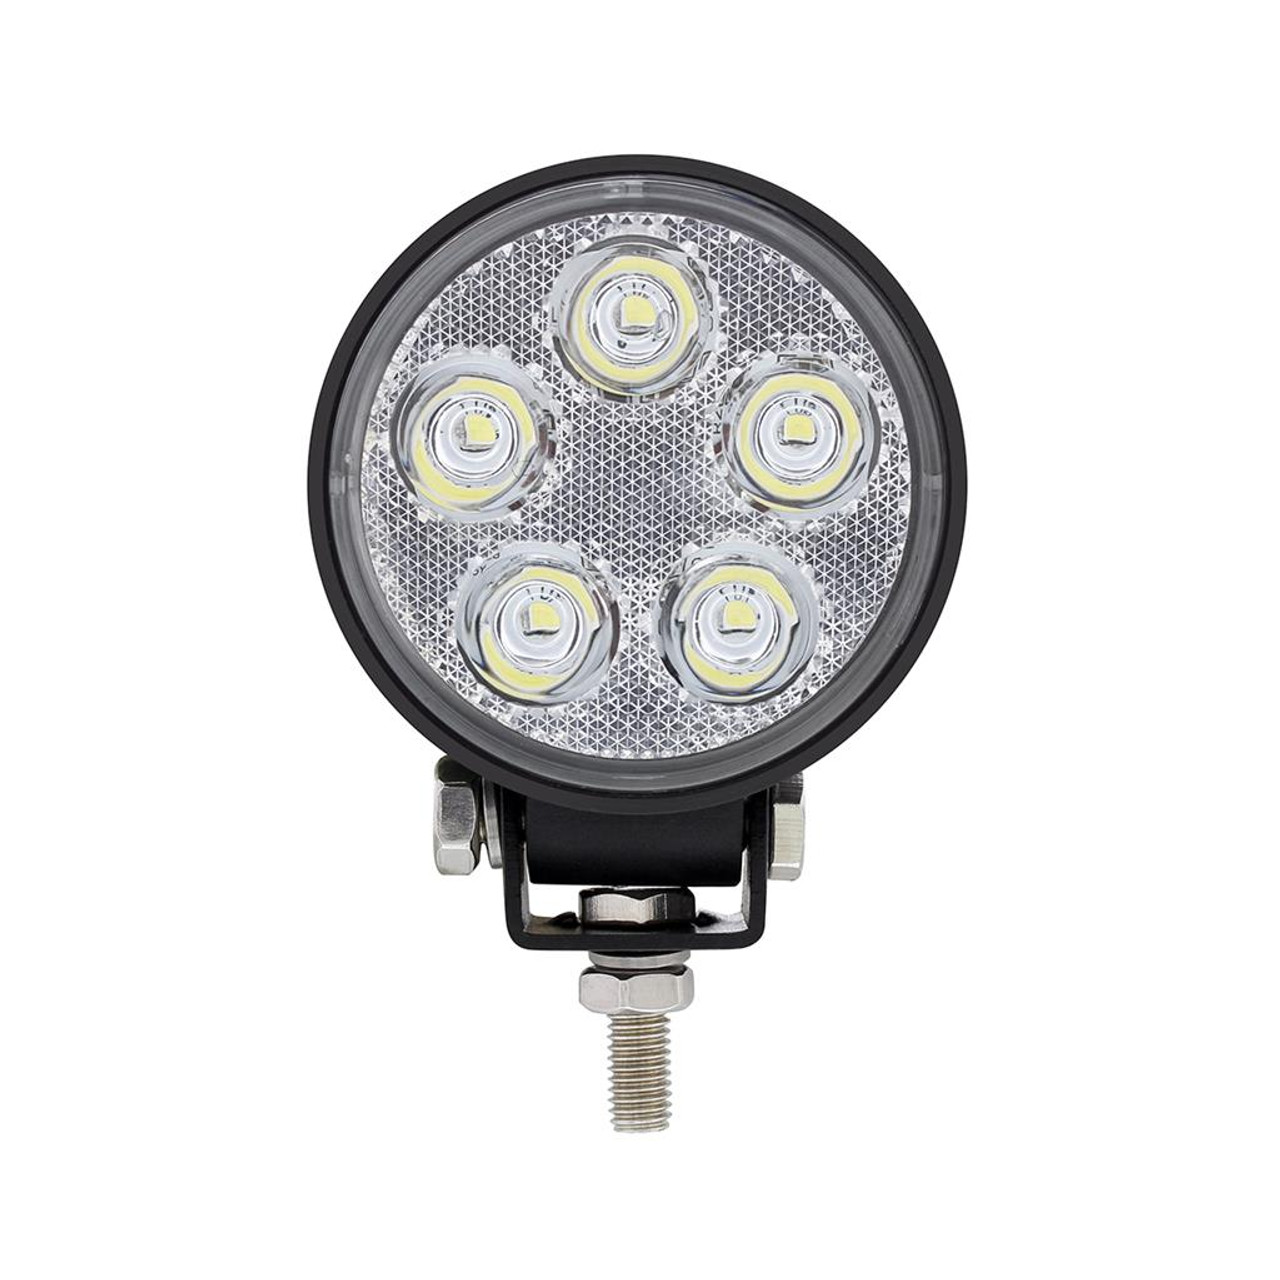 Not only do LEDs look better and brighter, but they also last way longer than their incandescent counterparts. Outfitting your big rig with LEDs will allow other drivers to see you better at night while lighting the road better than before.